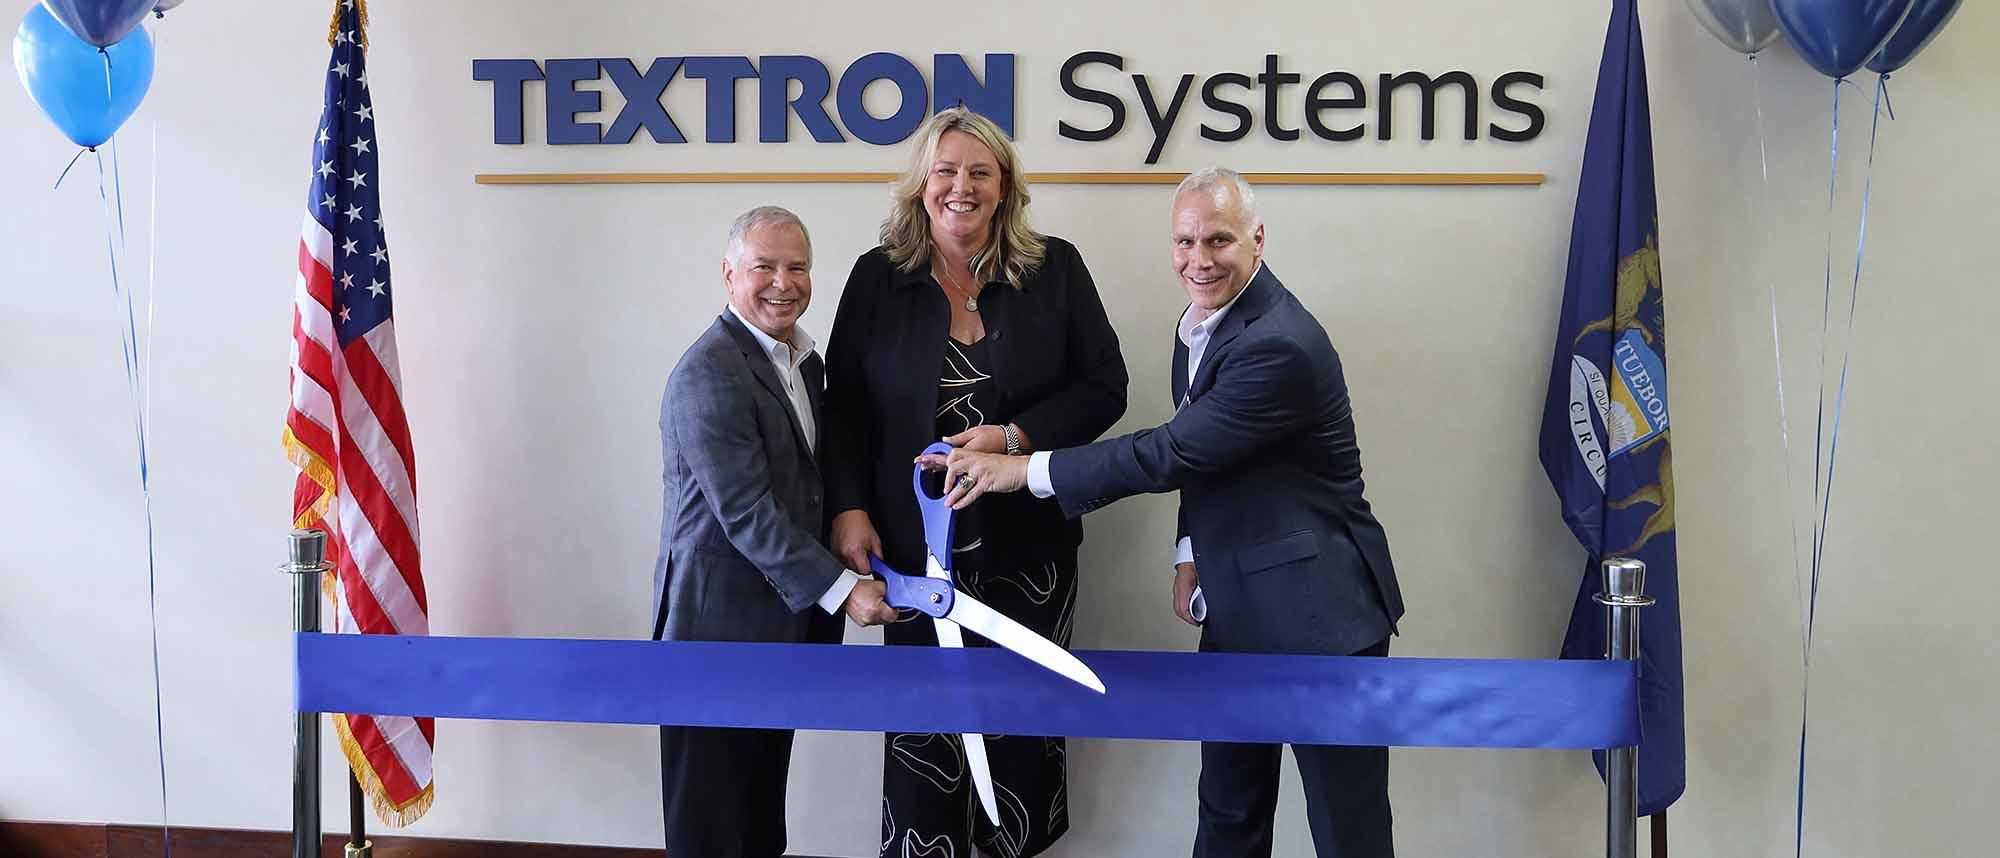 Textron Systems grand opening of its newest office in Sterling Heights, Michigan